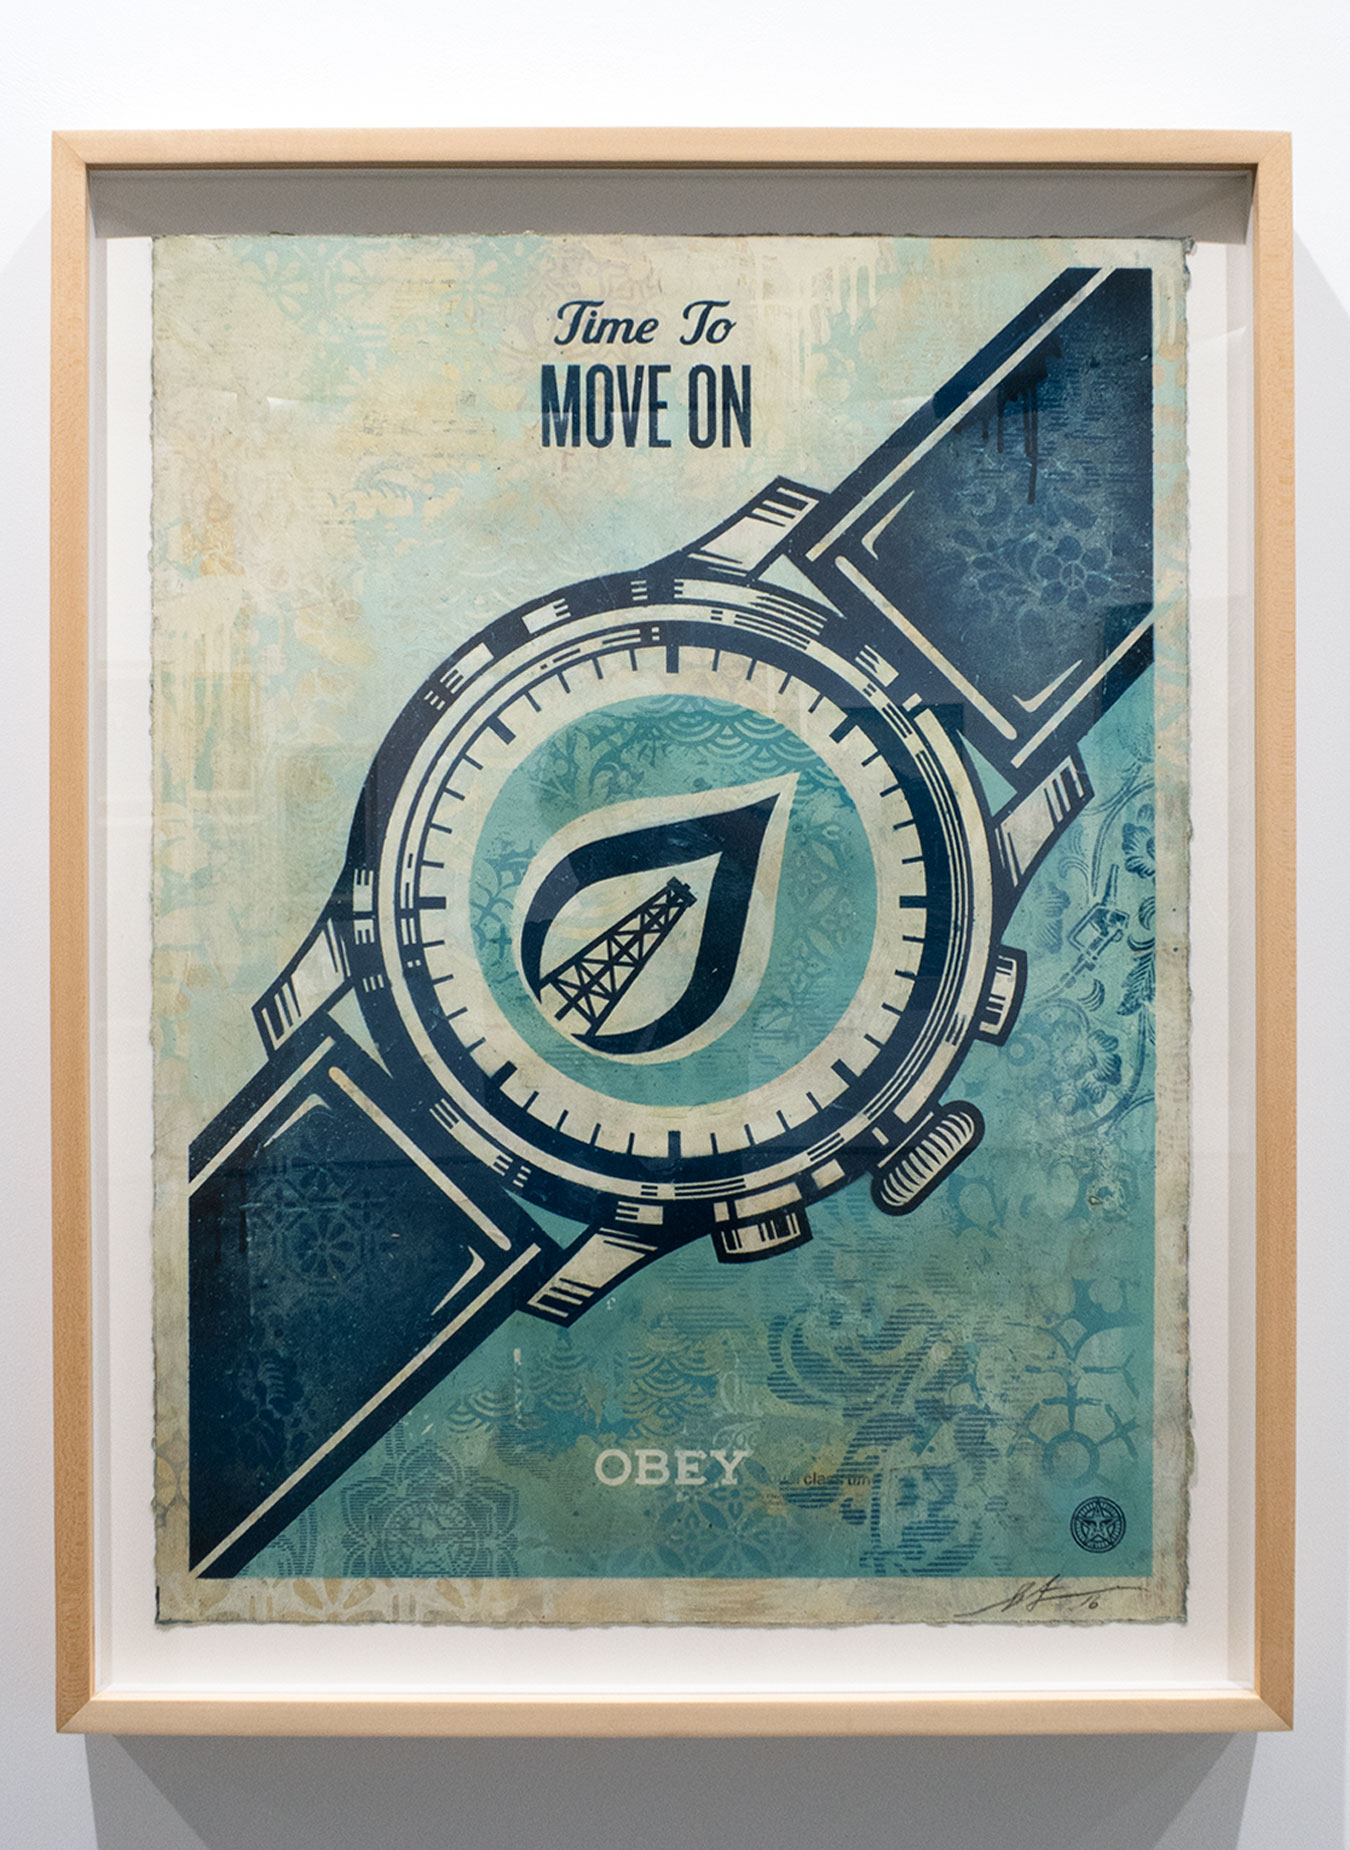 Time To Move ON / Earth Crisis Exhibition / Shepard Fairey 2016